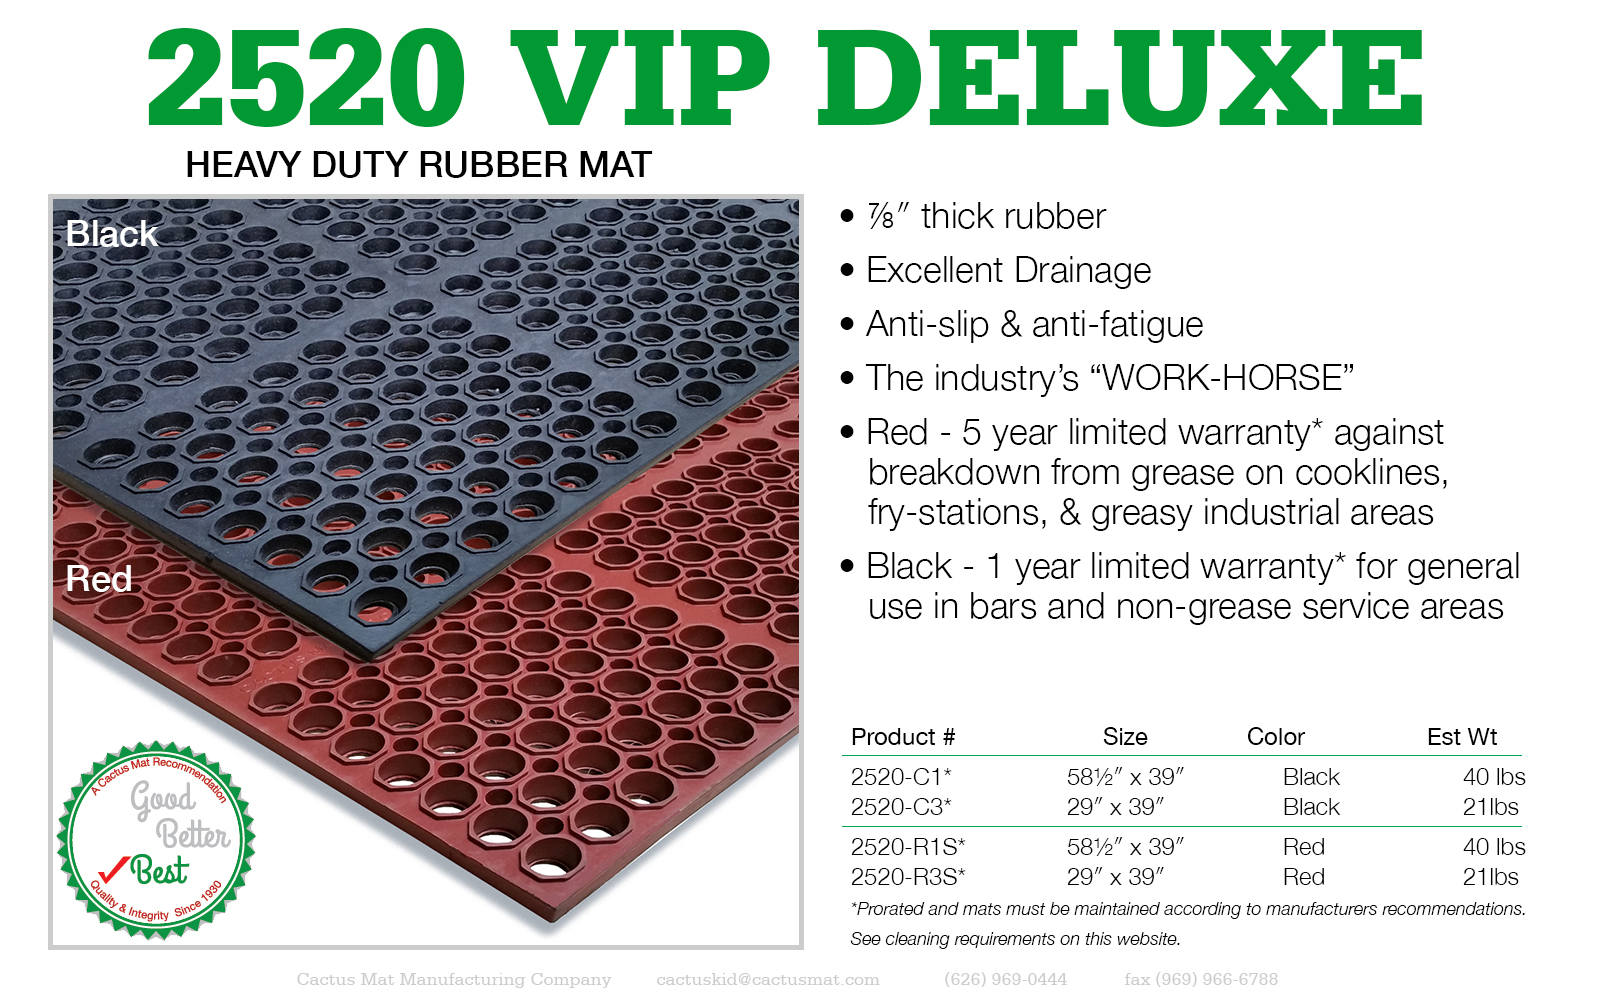 Cactus Mat 2520-R1S VIP Deluxe 58 1/2 x 39 Red Grease-Resistant,  Anti-Fatigue, Anti-Slip Floor Mat - 7/8 Thick